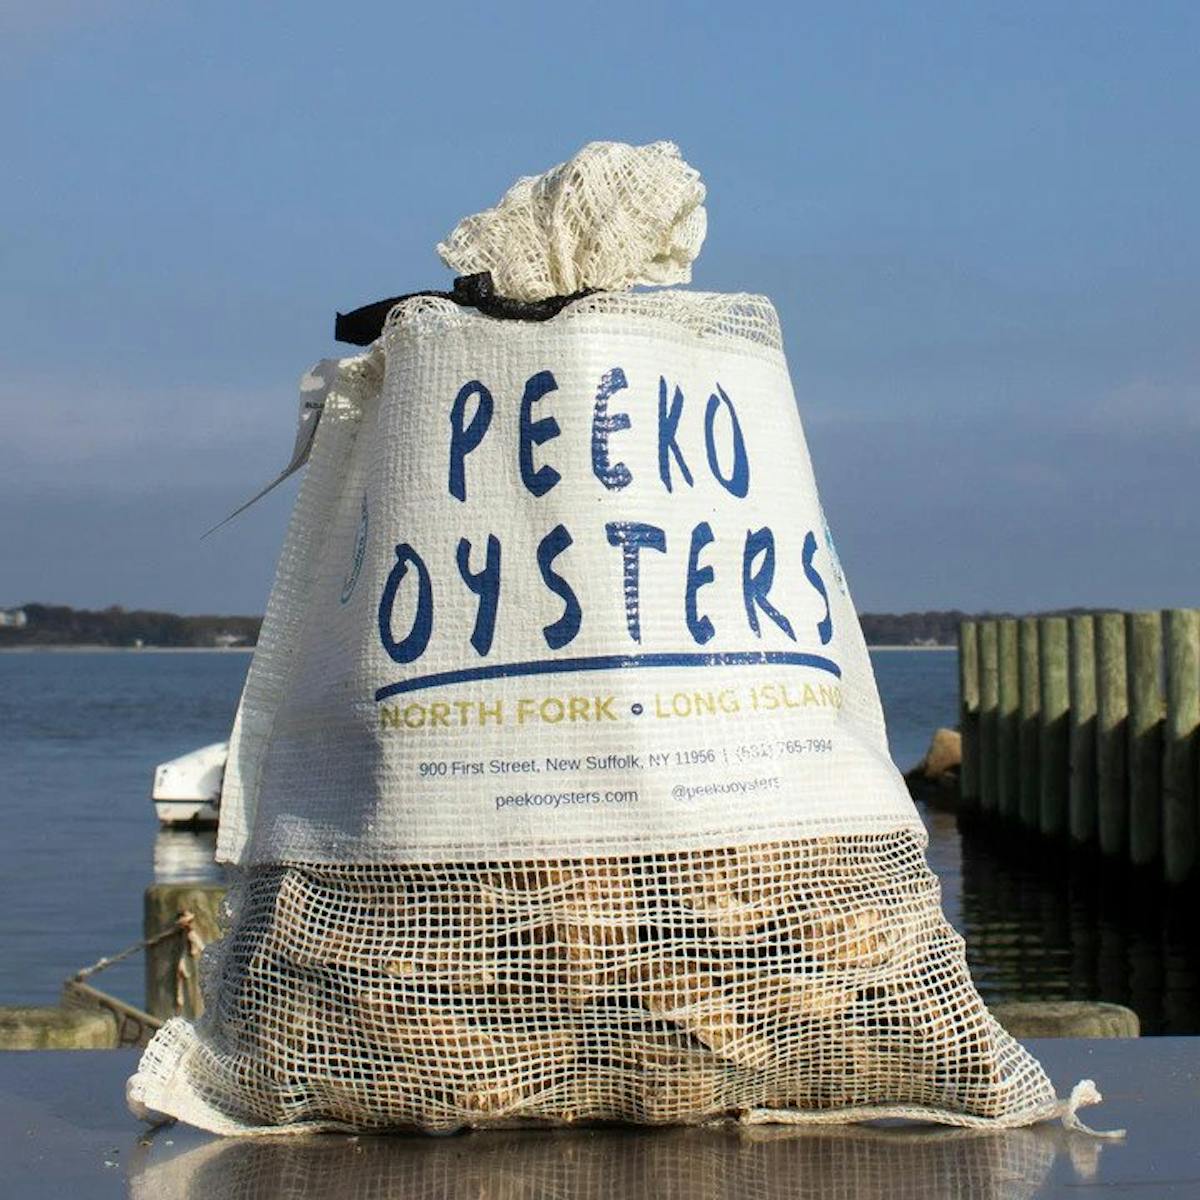 bag of oysters